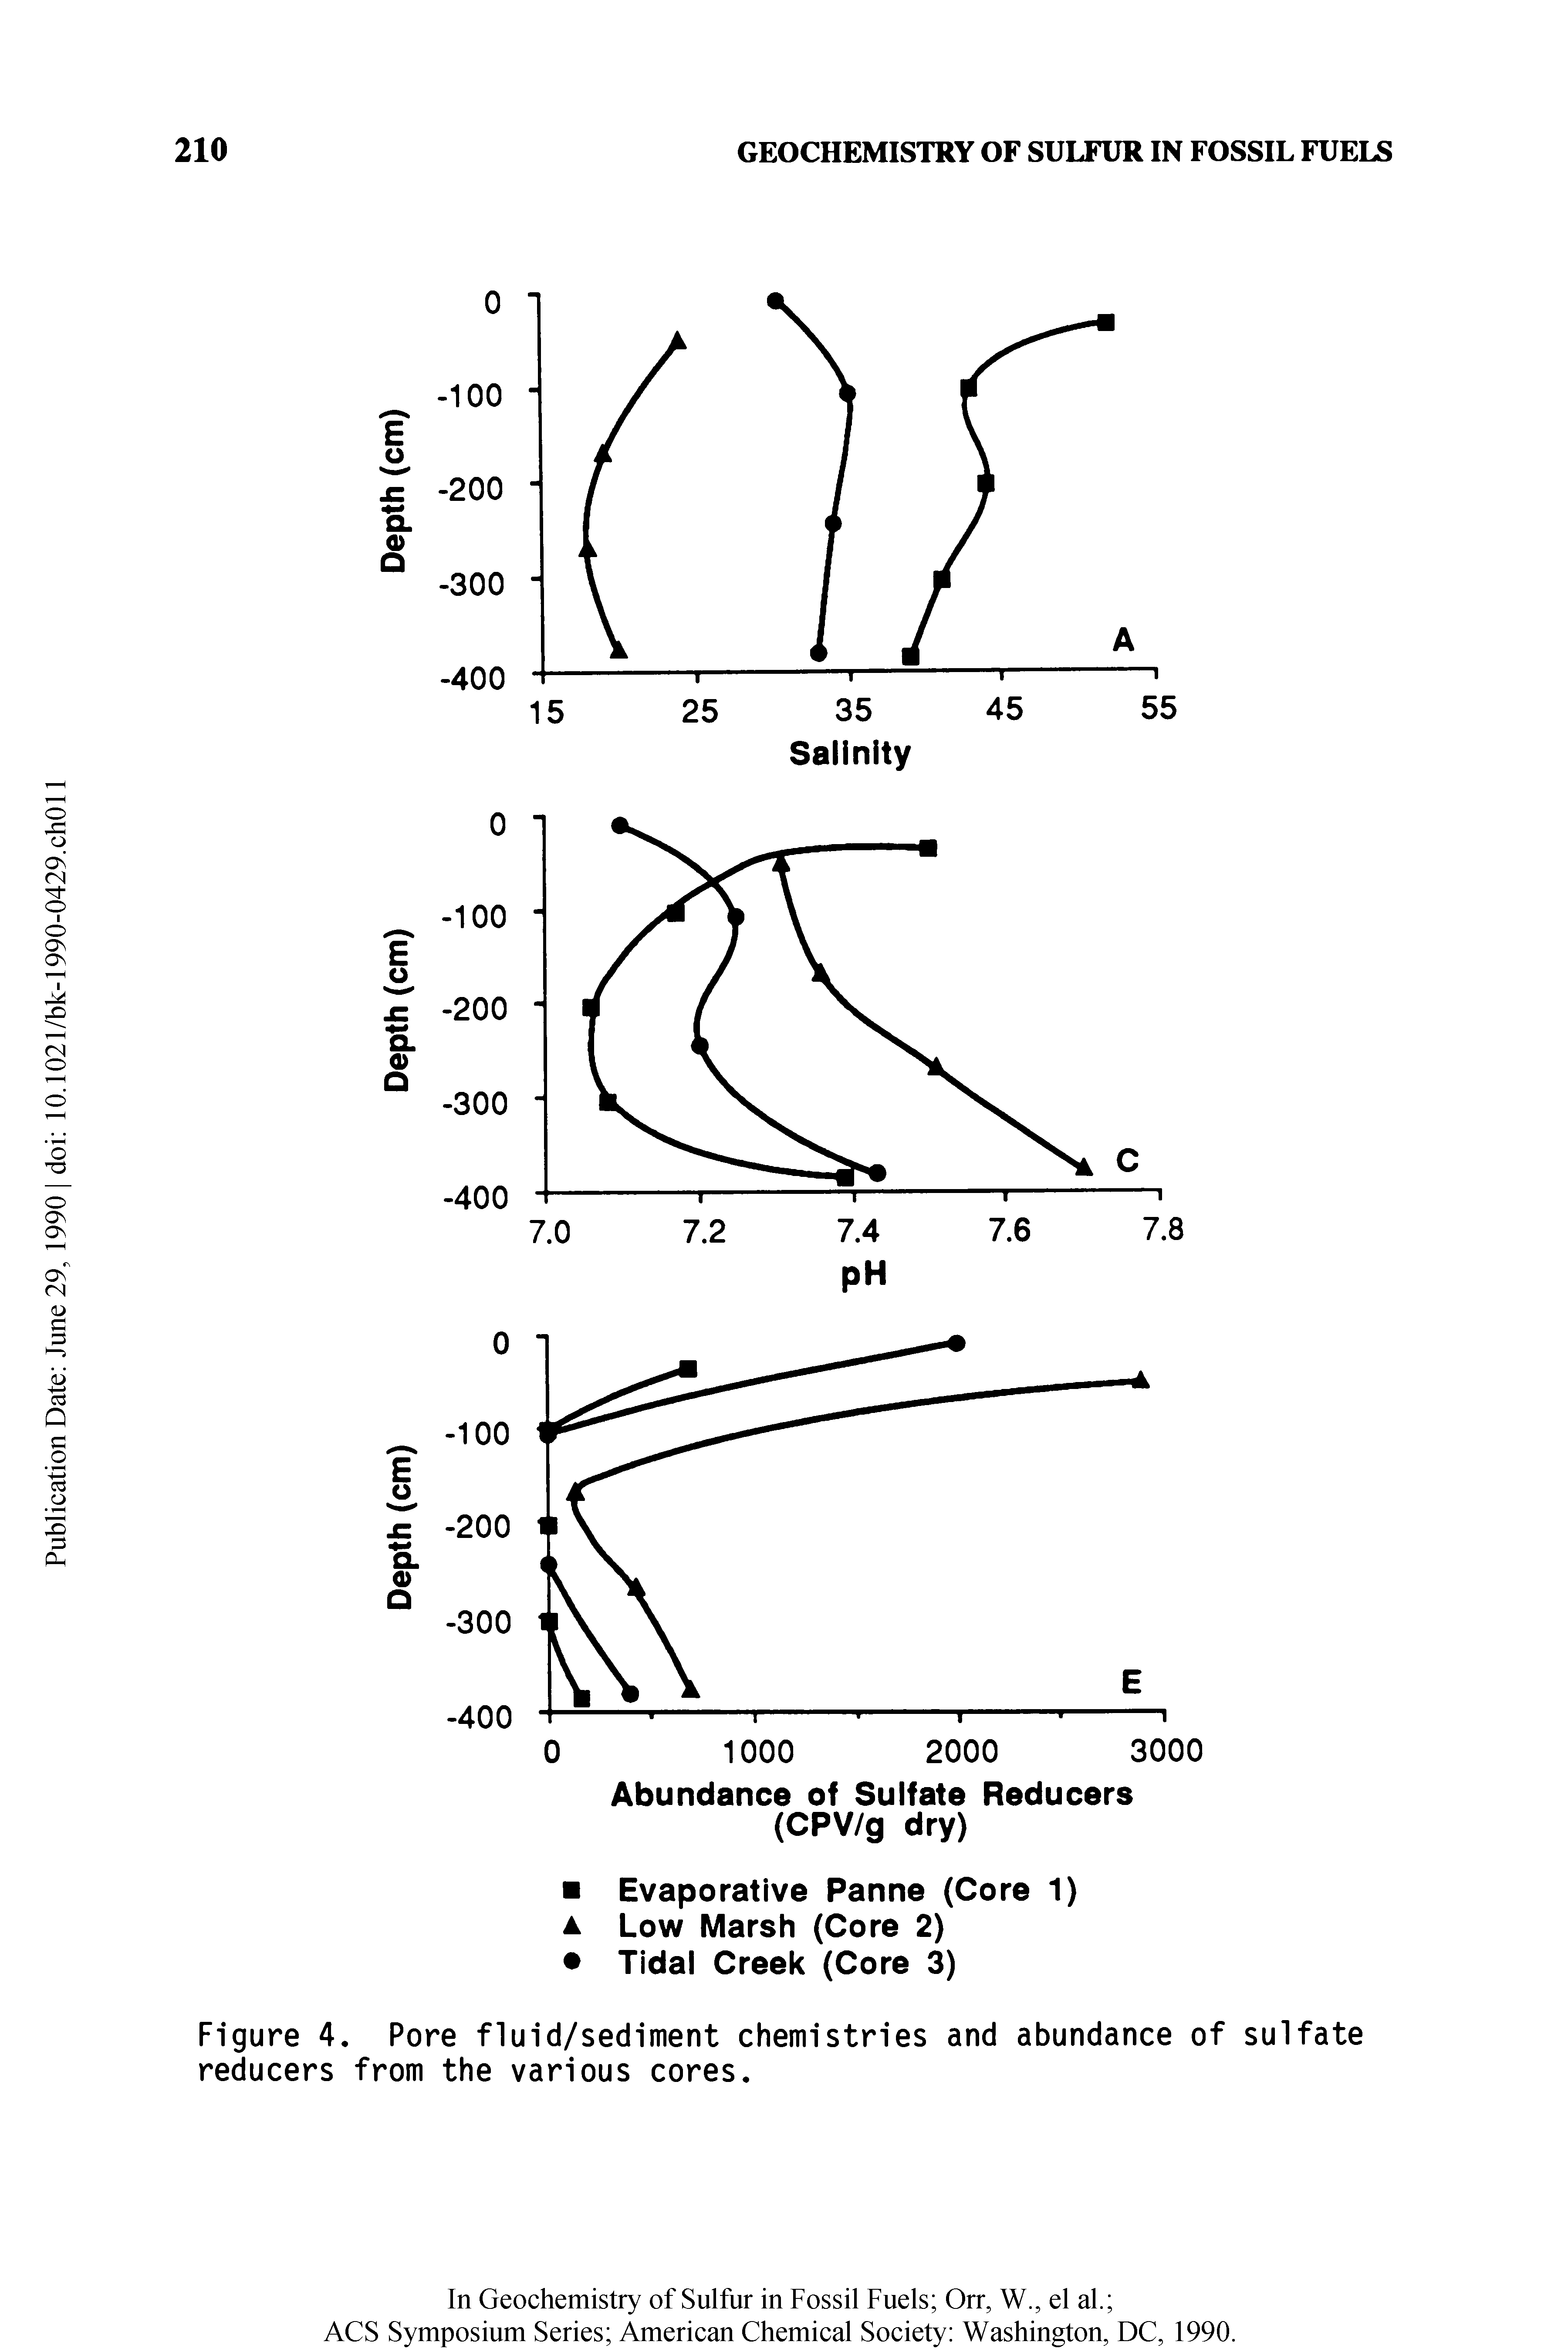 Figure 4. Pore fluid/sediment chemistries and abundance of sulfate reducers from the various cores.